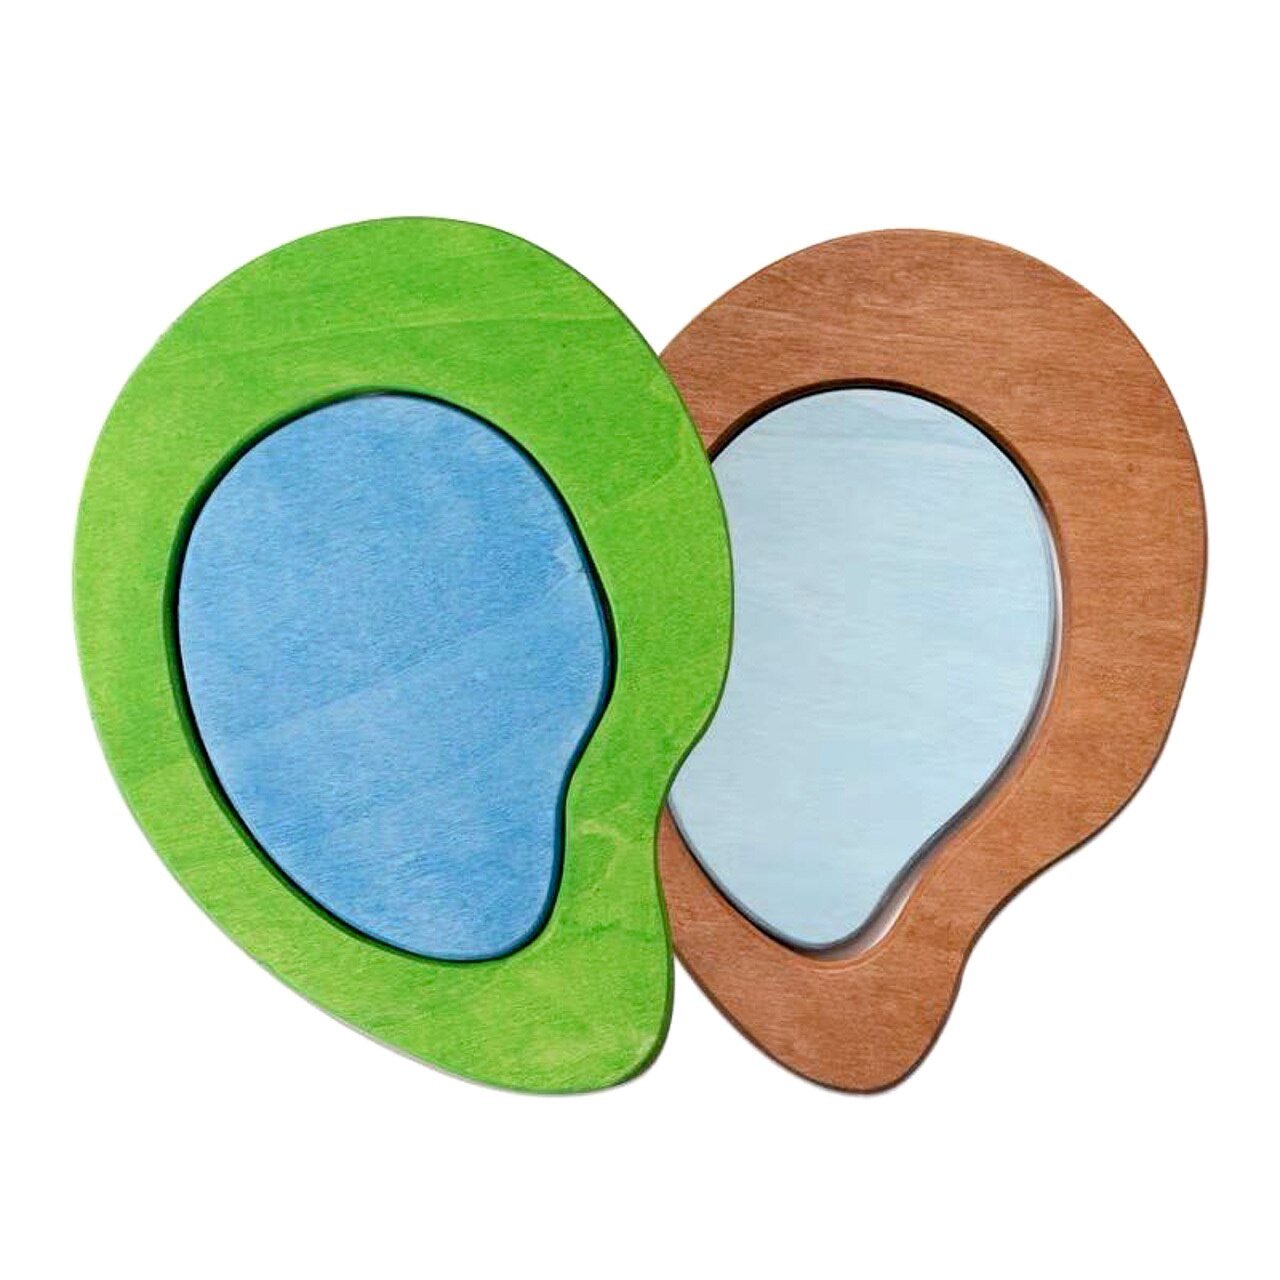 Avdar Wooden Lake (Summer/Winter) - Wood Wood Toys Canada's Favourite Montessori Toy Store